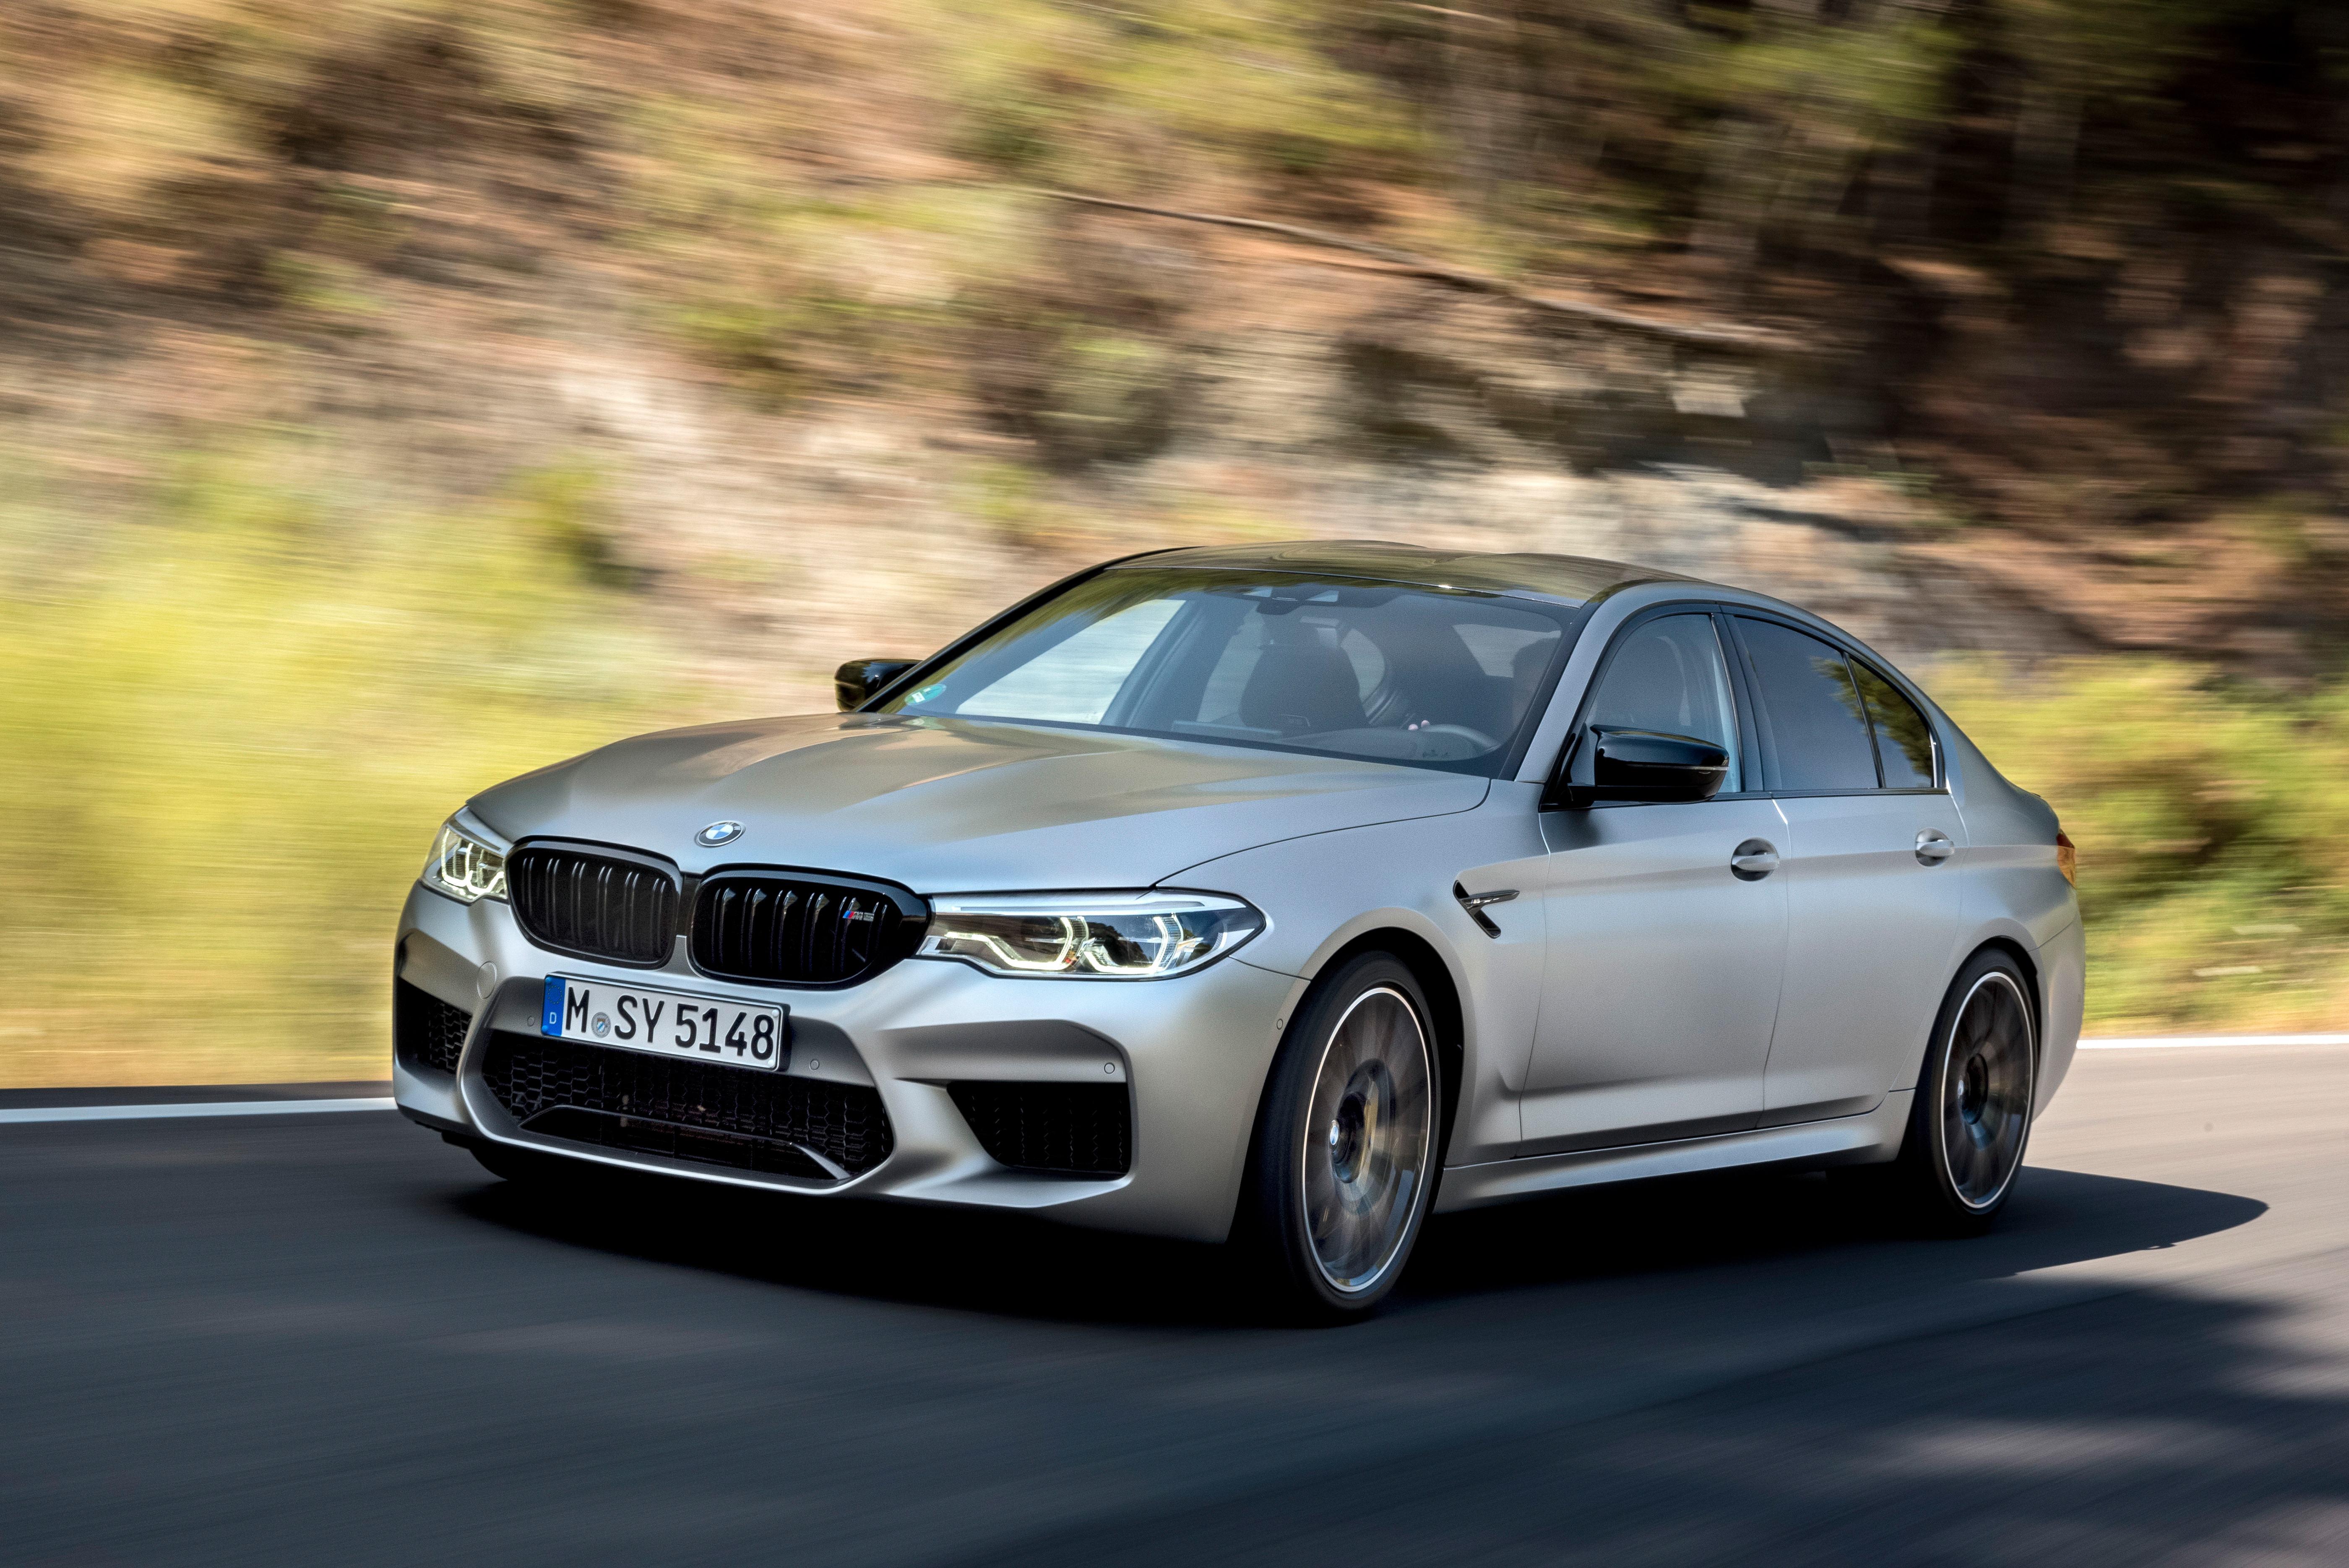 М5 дорест. BMW m5 f91. БМВ м5 f90. БМВ m5 f90 Competition. BMW m5 f90 Touring.